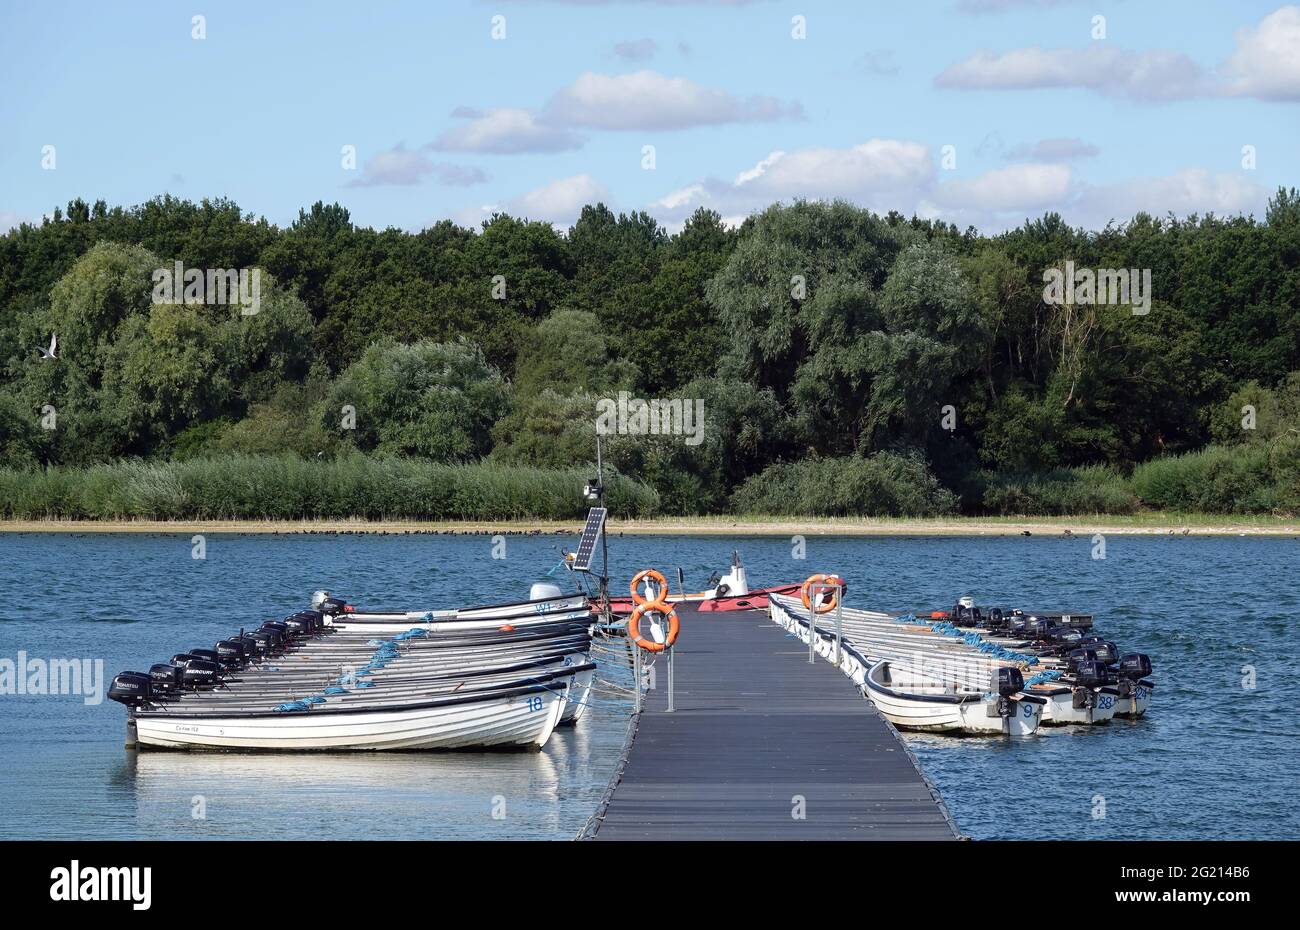 HANNINGFIELD, UNITED KINGDOM - Aug 03, 2020: Two rows of motor boats tied to a jetty on Hanningfield Reservoir in Essex with a wooded area in the back Stock Photo